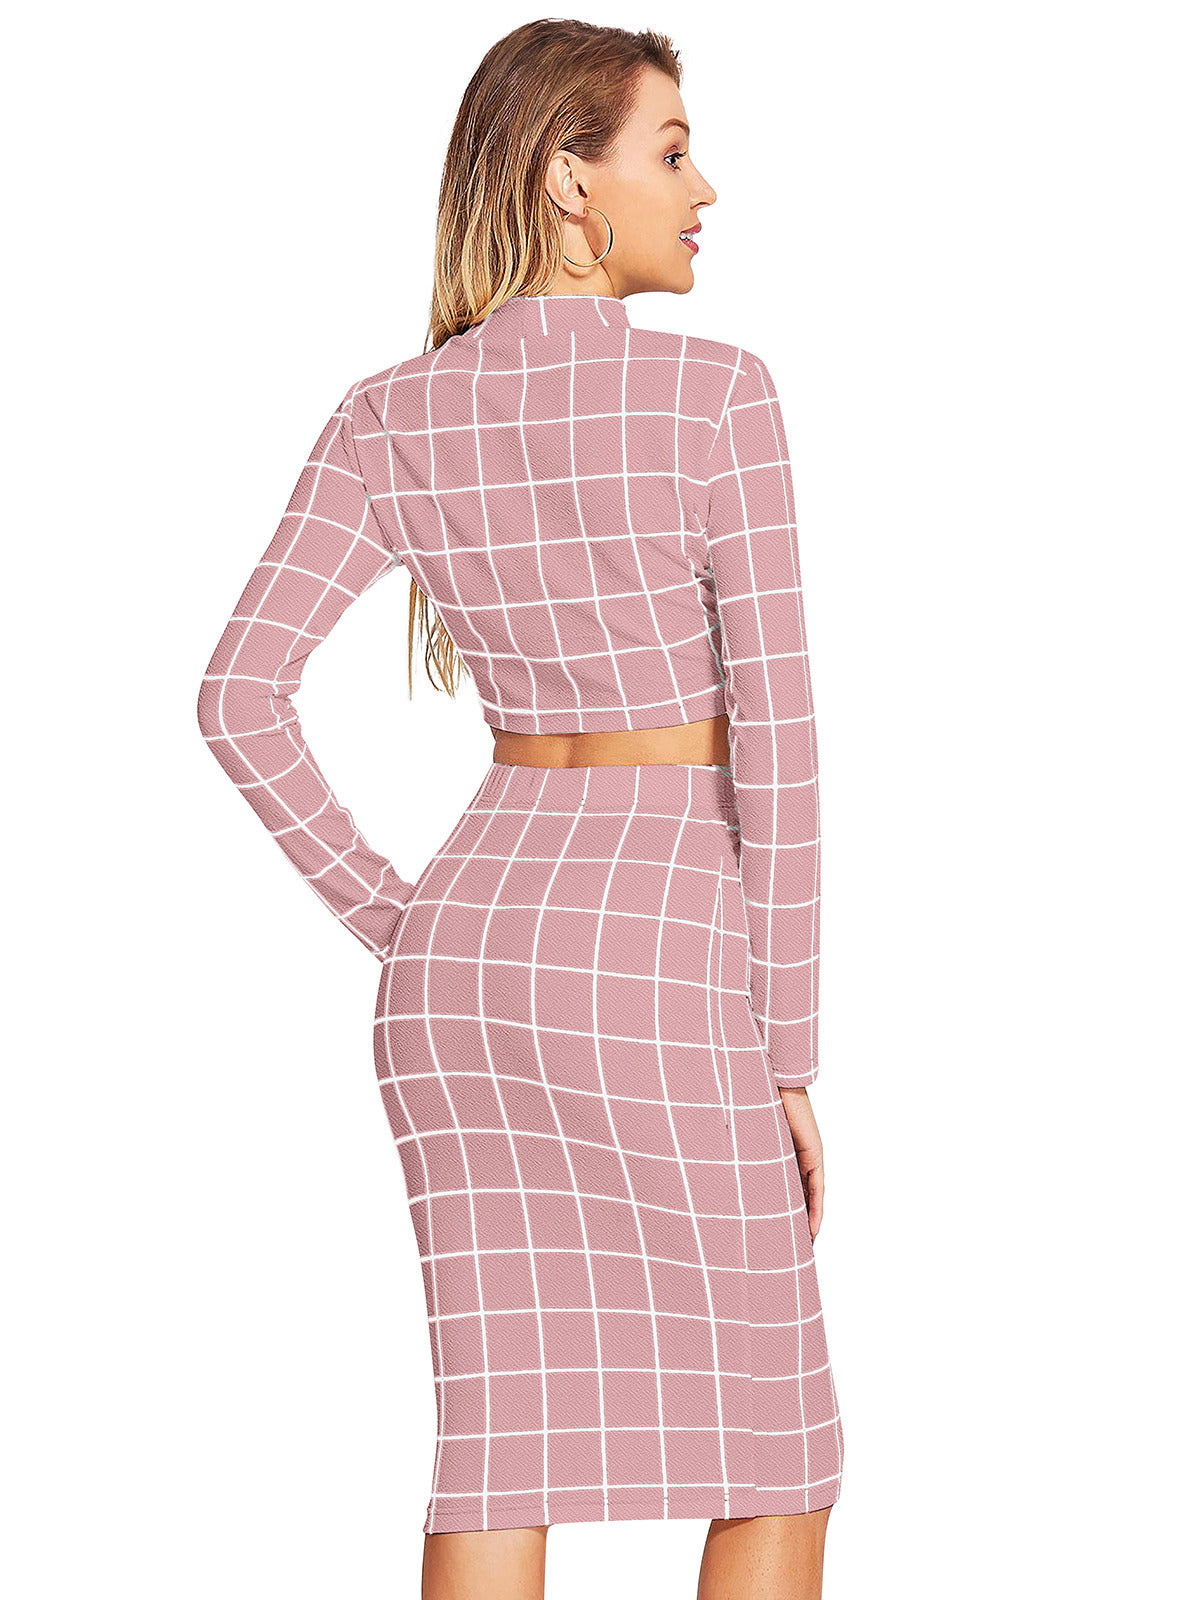 Odette Light Pink Knit Fabric Stitched Co Ord Set For Women